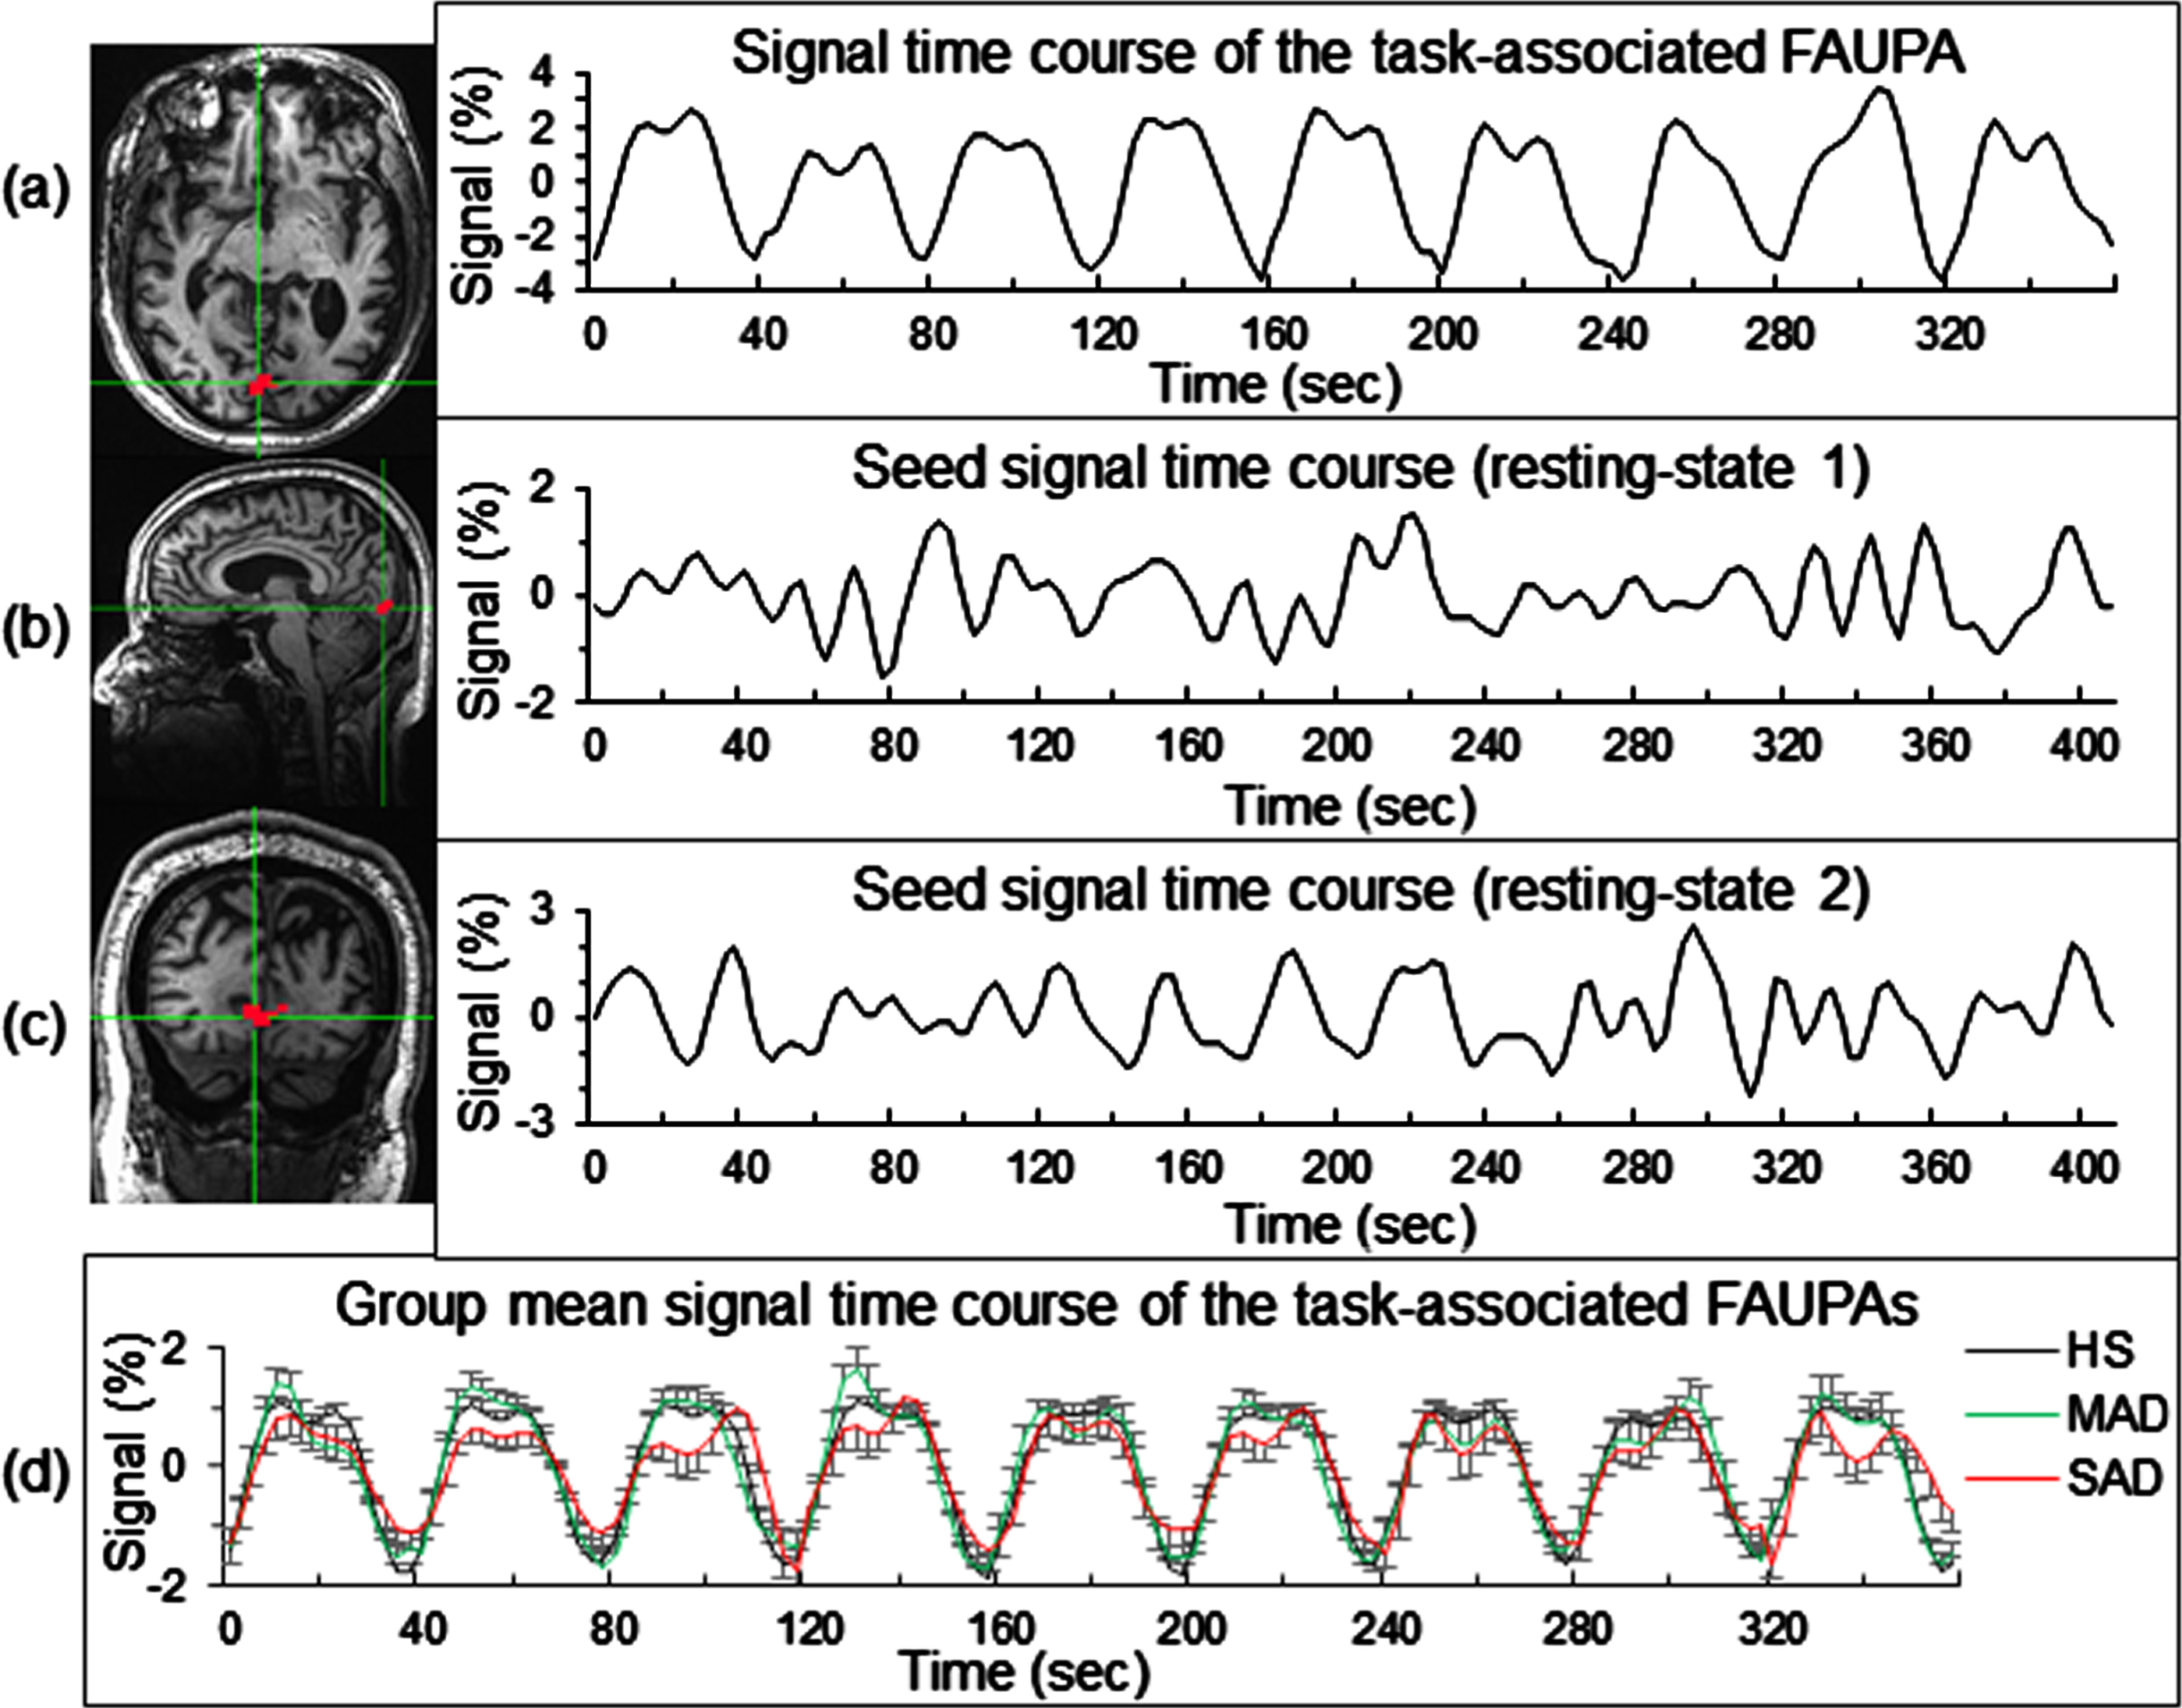 Illustration of the selected task-associated FAUPA for a representative SAD patient and using this FAUPA as seed to conduct a seed-based visual functional connectivity analysis for the resting-state data. The red clusters in the three images represent the selected task-associated FAUPAs in the putative V1, identified with the task-fMRI data for the unfamiliar face category [32]. The FAUPA’s signal time course was the mean signal time course averaged over that of all voxels within the FAUPA (a). Task-induced, time-locked signal changes are conspicuous for each of the nine task trials. The two plots in (b) and (c) show the seed-mean signal time courses for the two resting-state time series, respectively. (d): Comparison of the group-mean signal time courses of the selected FAUPAs for the three participant groups. HS, healthy senior; MAD, mild/moderate AD; SAD, severe AD. The error bar indicates the standard error of the means.